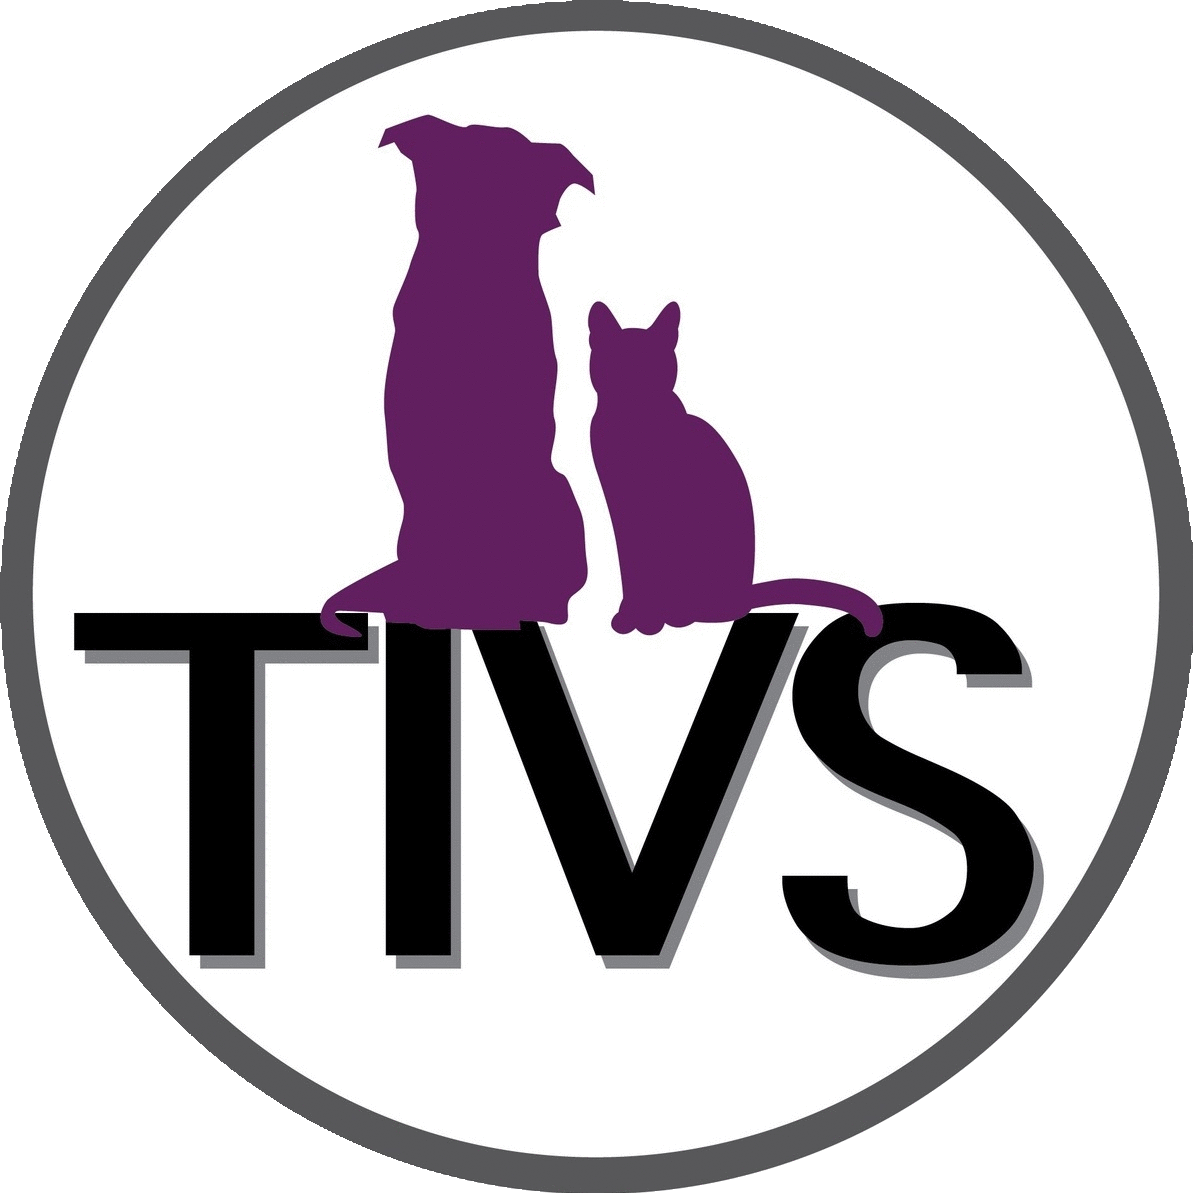 Thousand Islands Veterinary Services